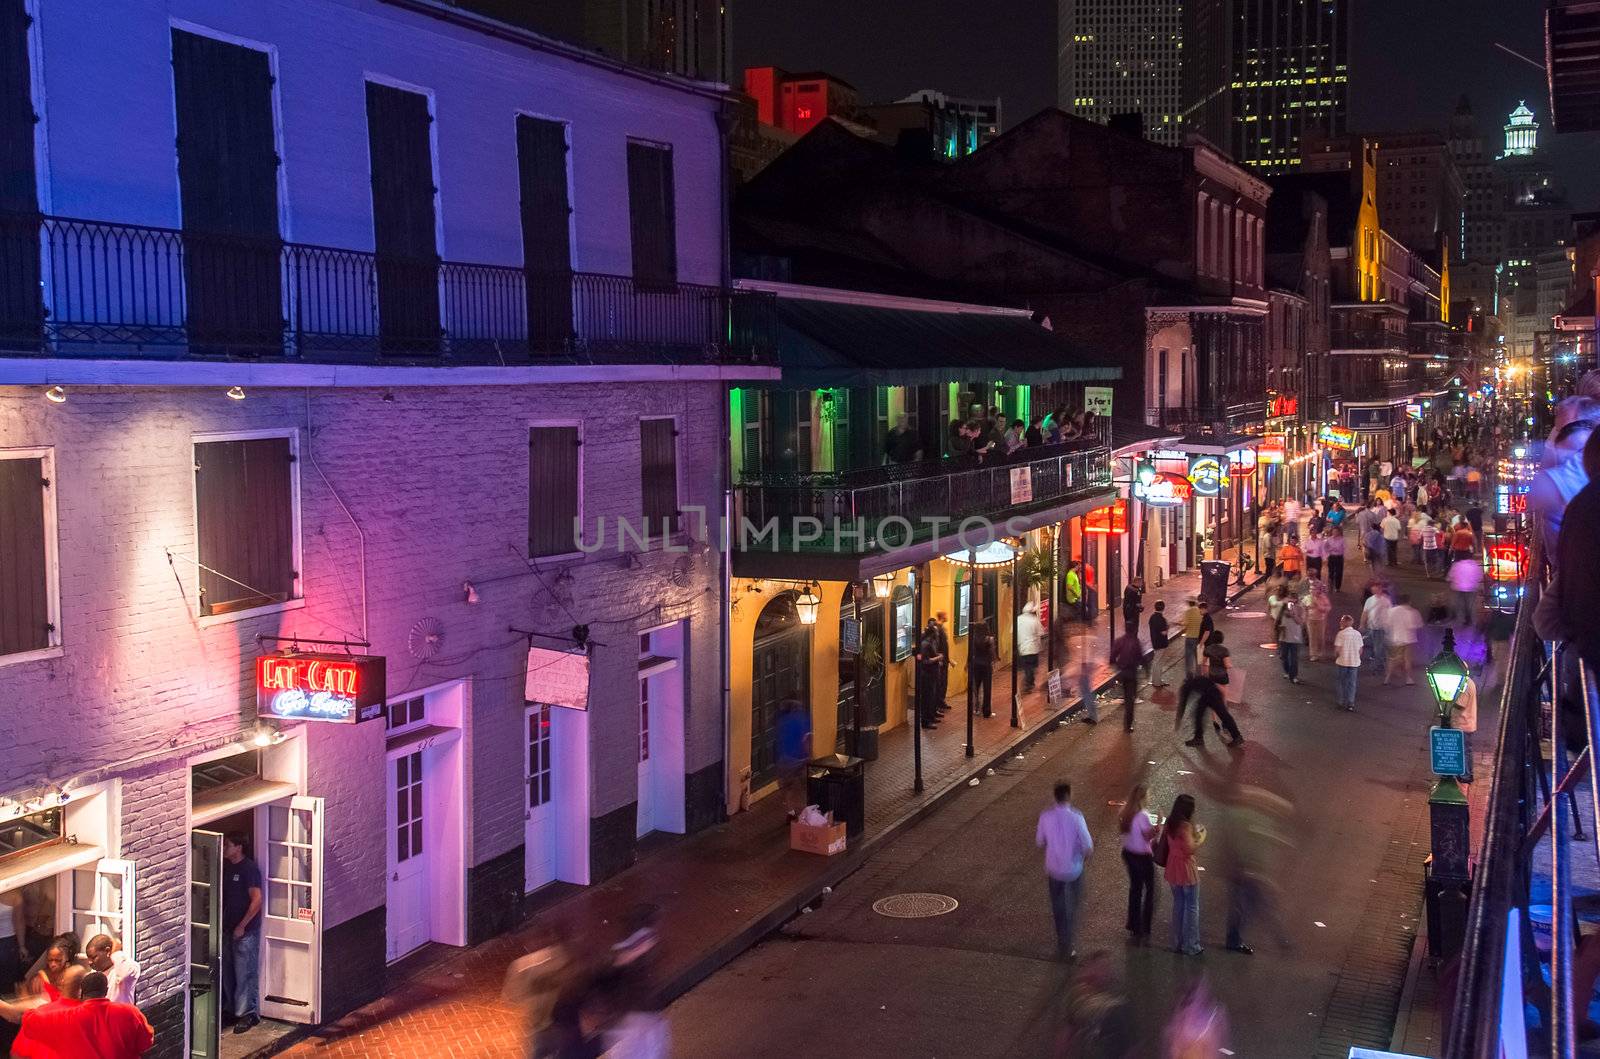 NEW ORLEANS, USA - CIRCA MARCH 2008: Crowds of people and neon lights at dusk circa March 2008 in New Orleans, USA. Tourism is the area's major source of income after Hurricane Katrina in 2005.